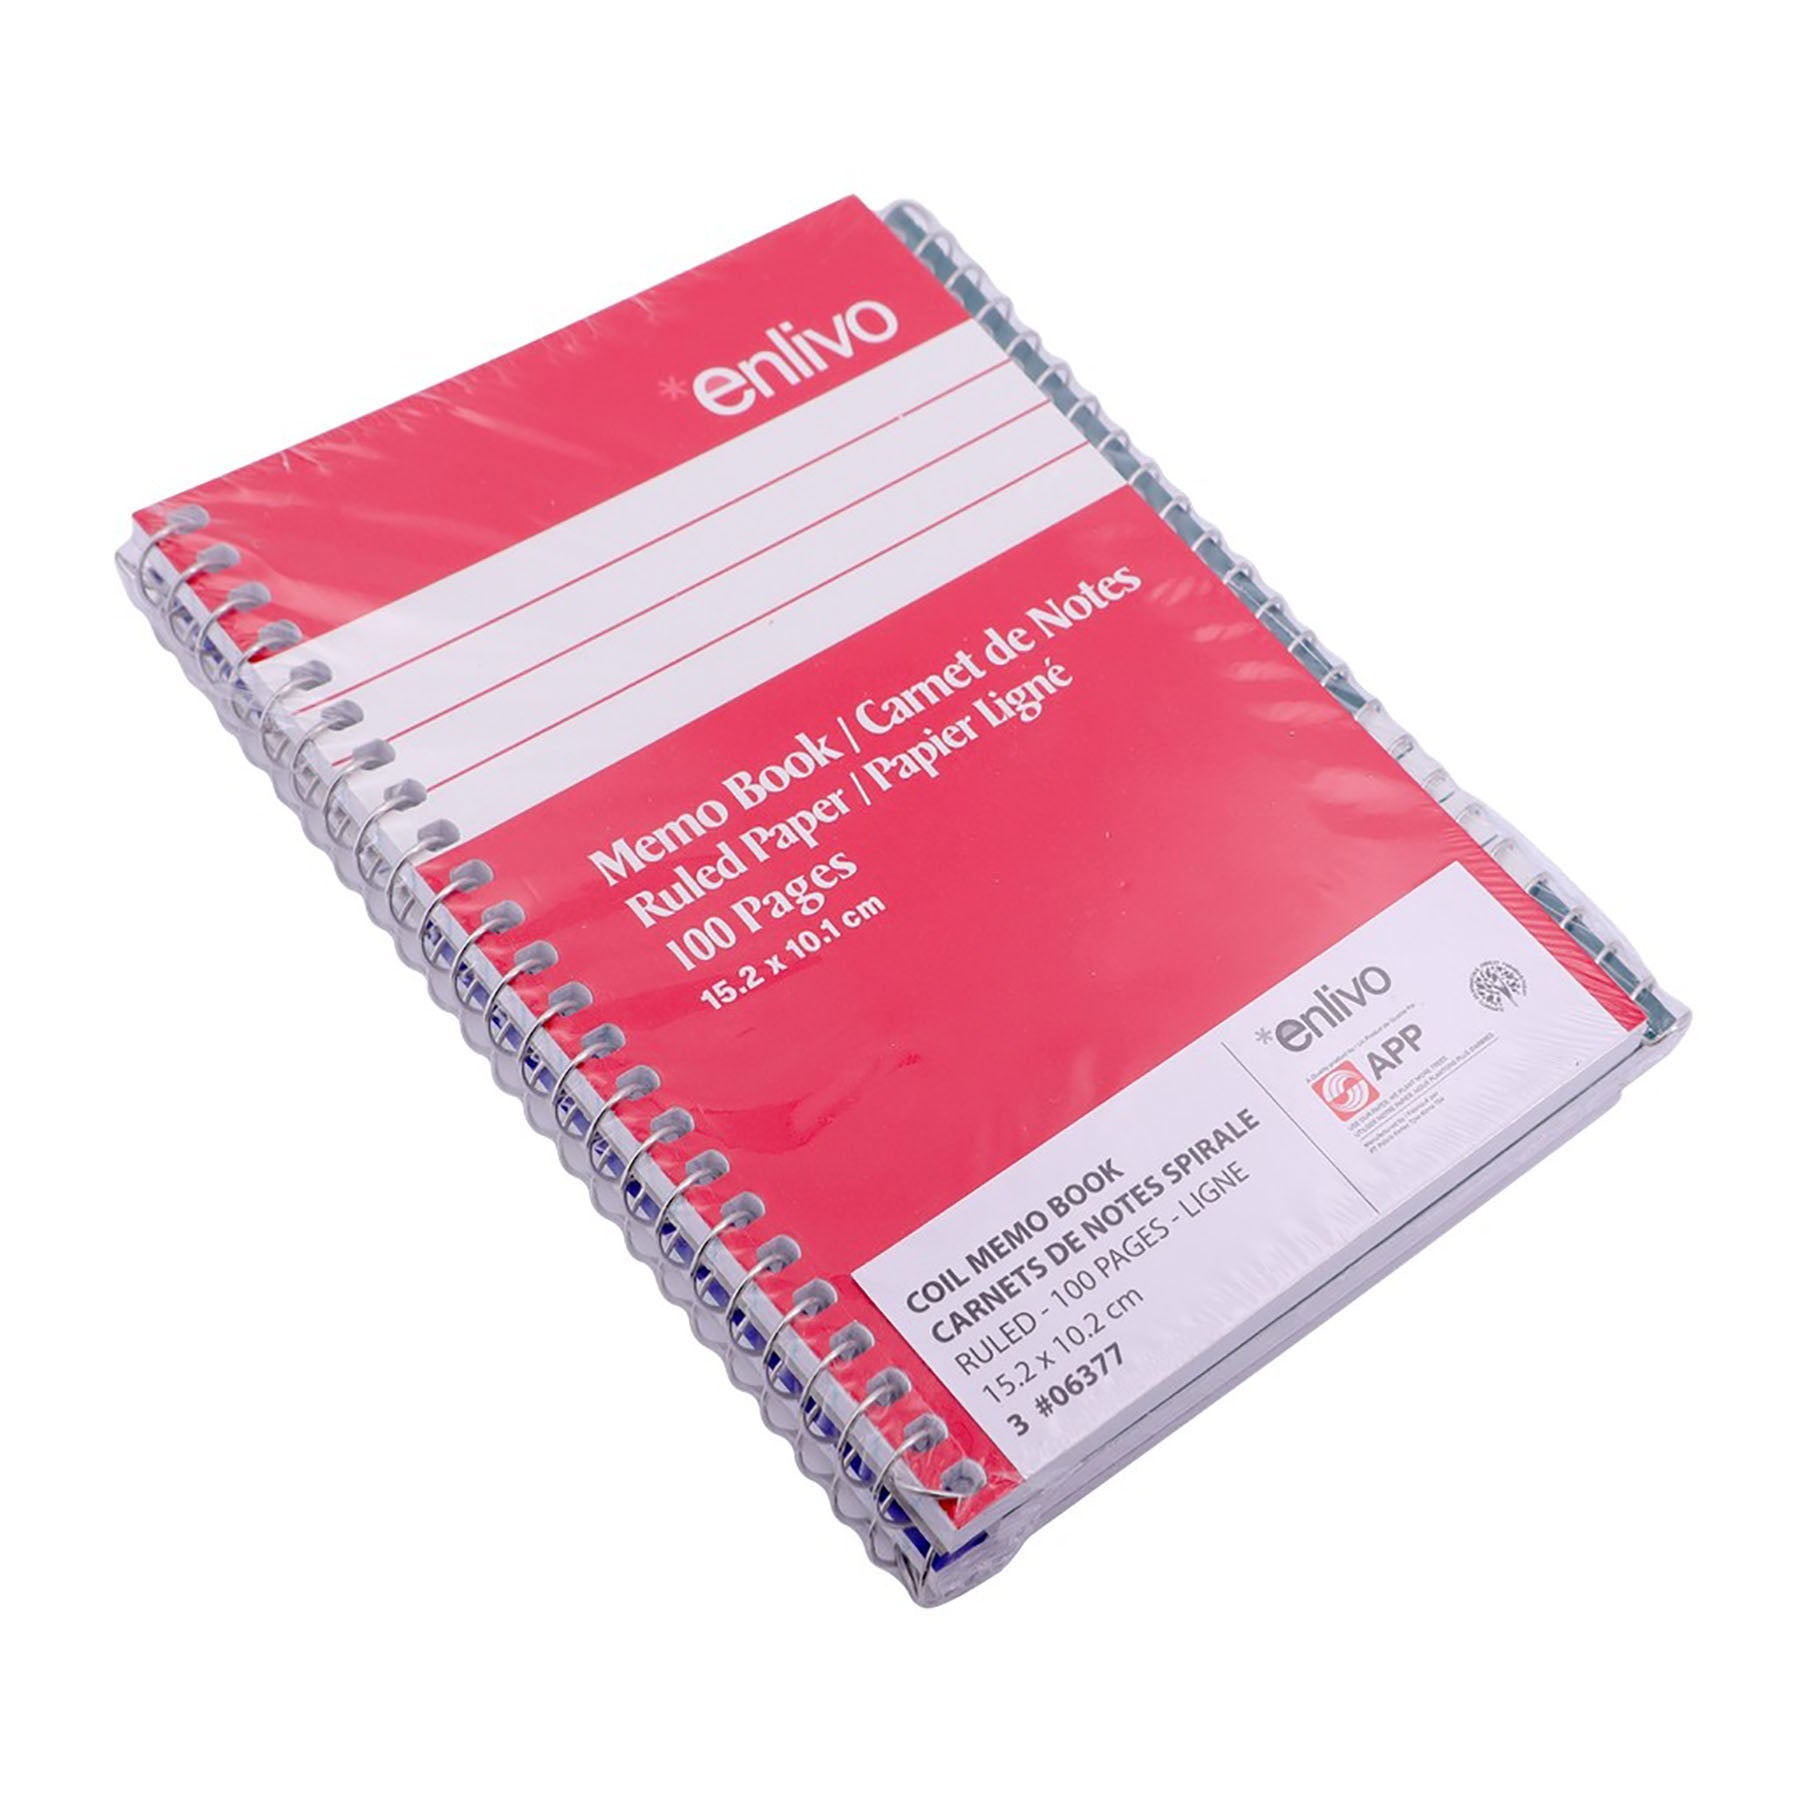 APP Coil 3 Memo Pads 100 Lined Pages Side Flip 4x6in